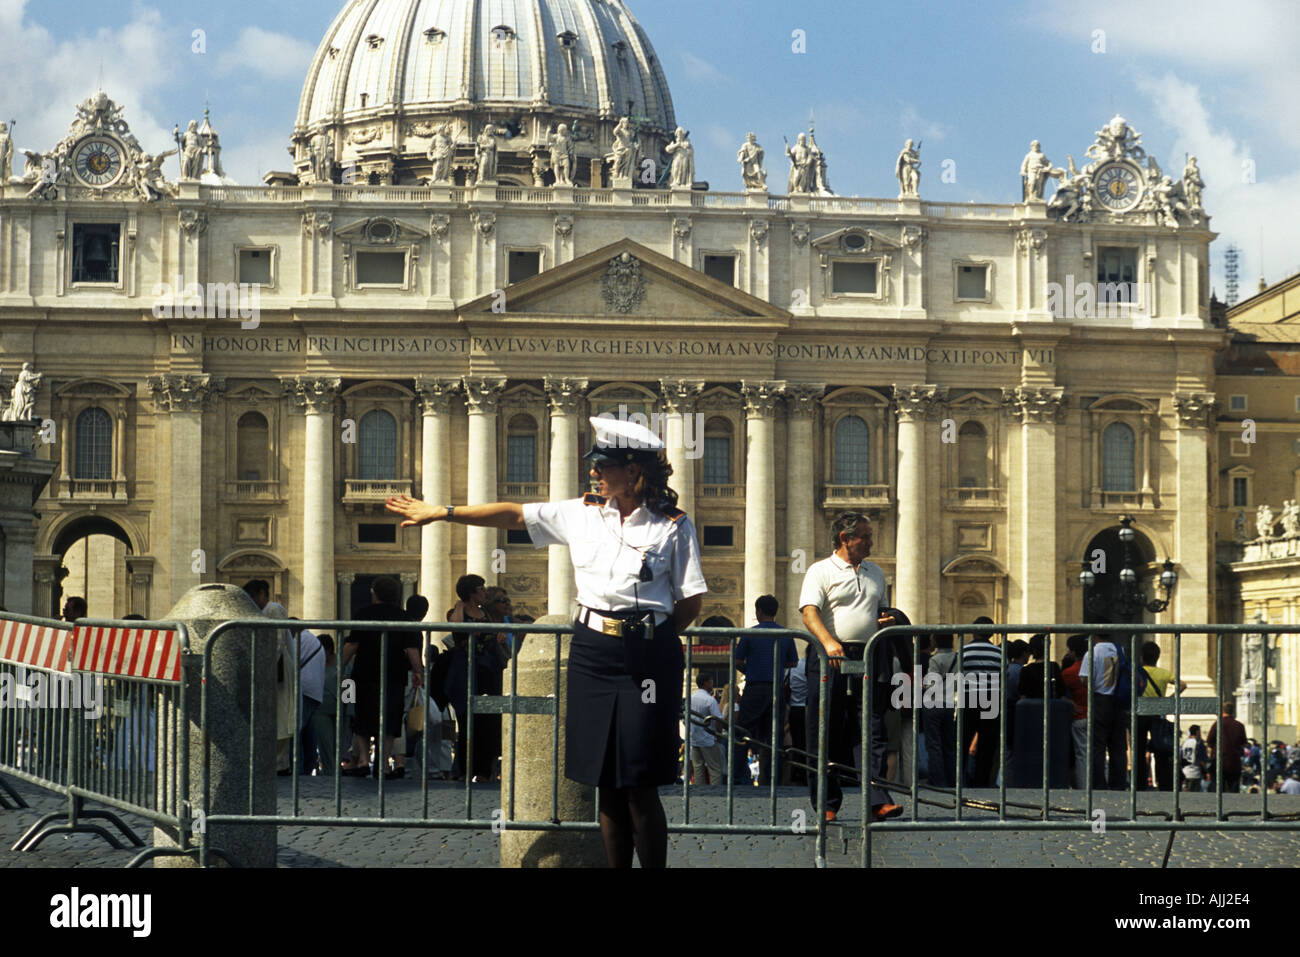 A female police officer directs traffic in front of Saint Peter s Square in Rome Italy Stock Photo